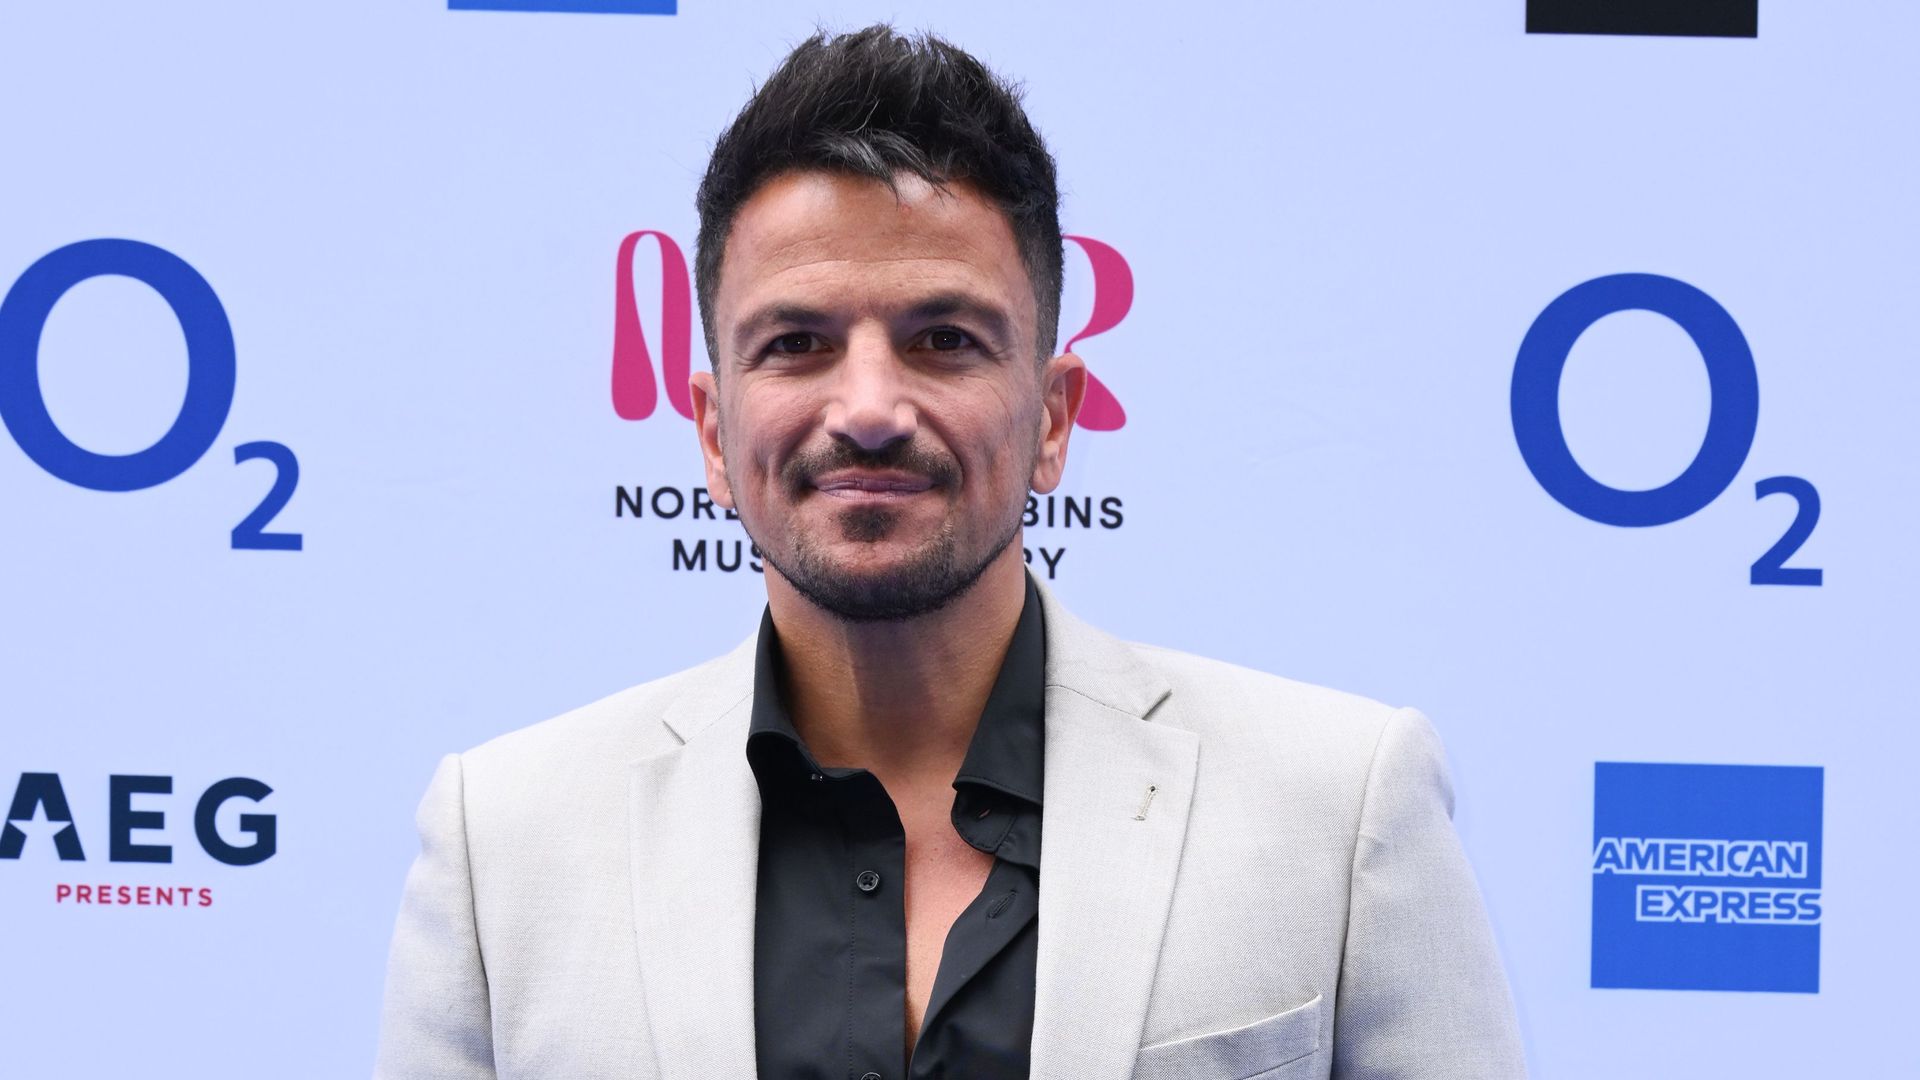 Peter Andre in grey suit